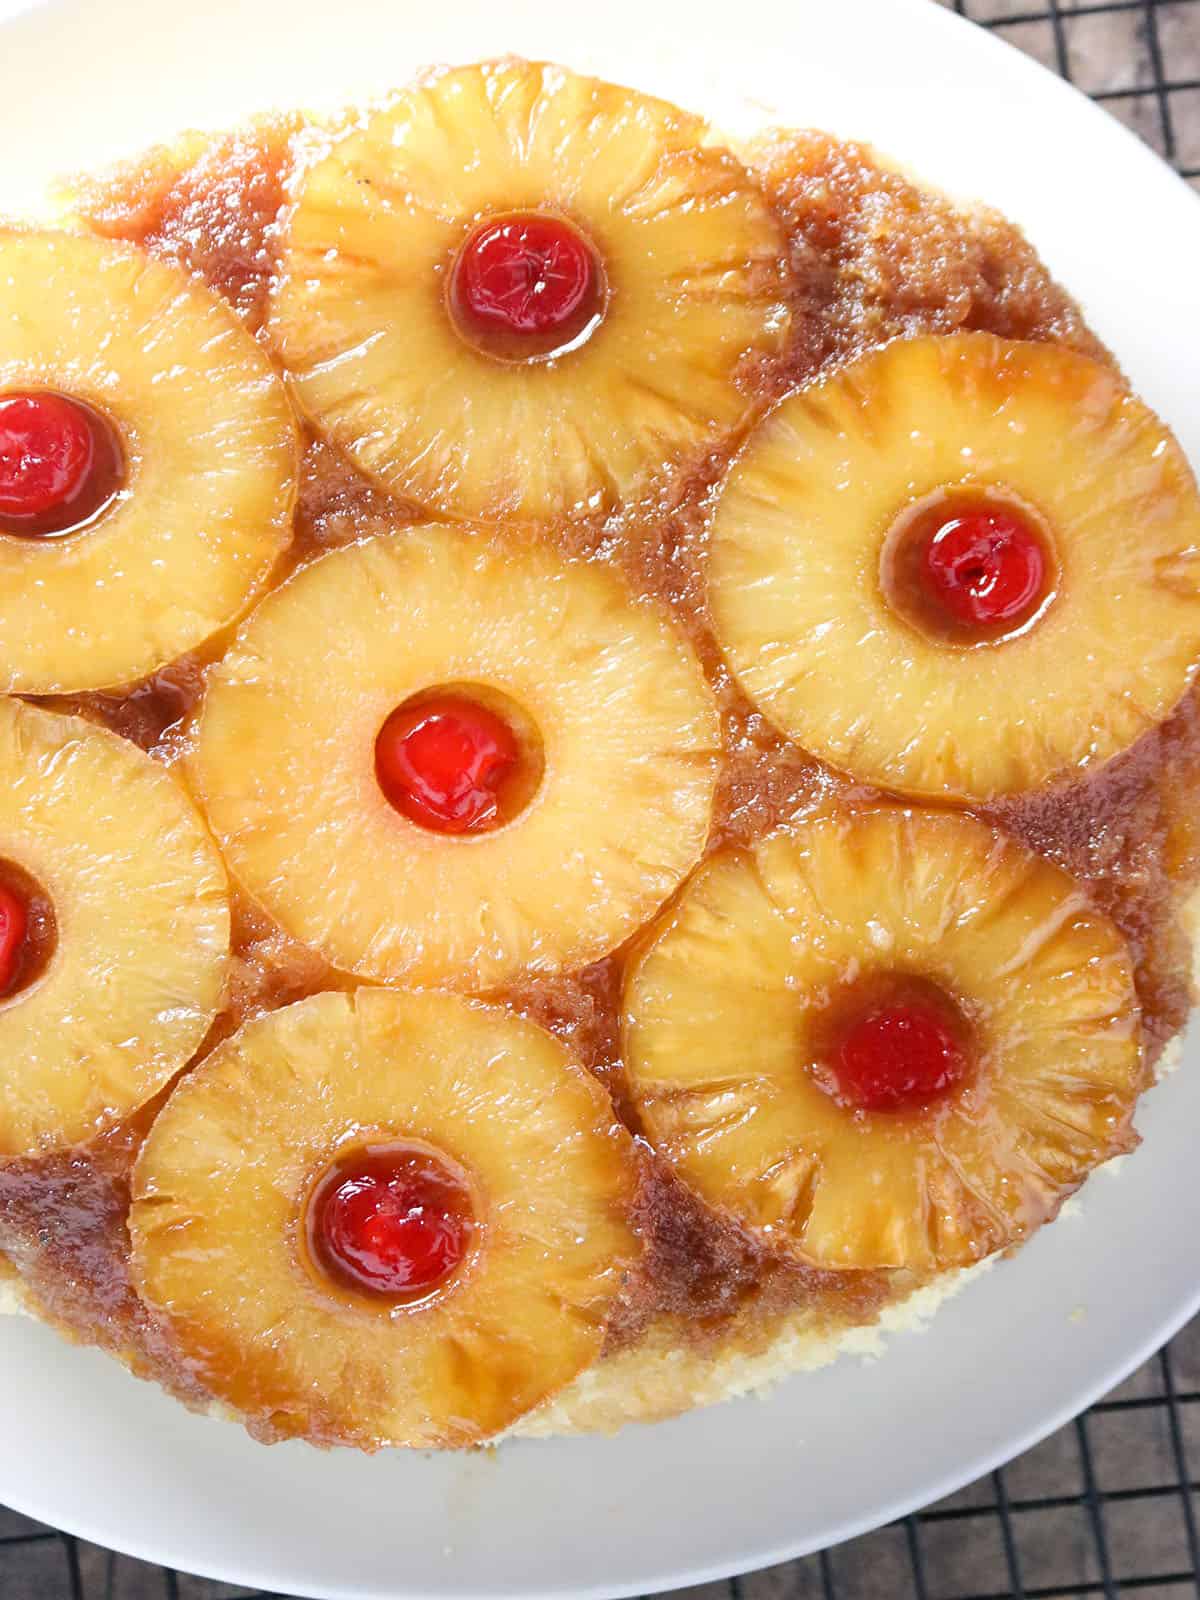 Grilled Pineapple Upside Down Cakes - One Hot Oven